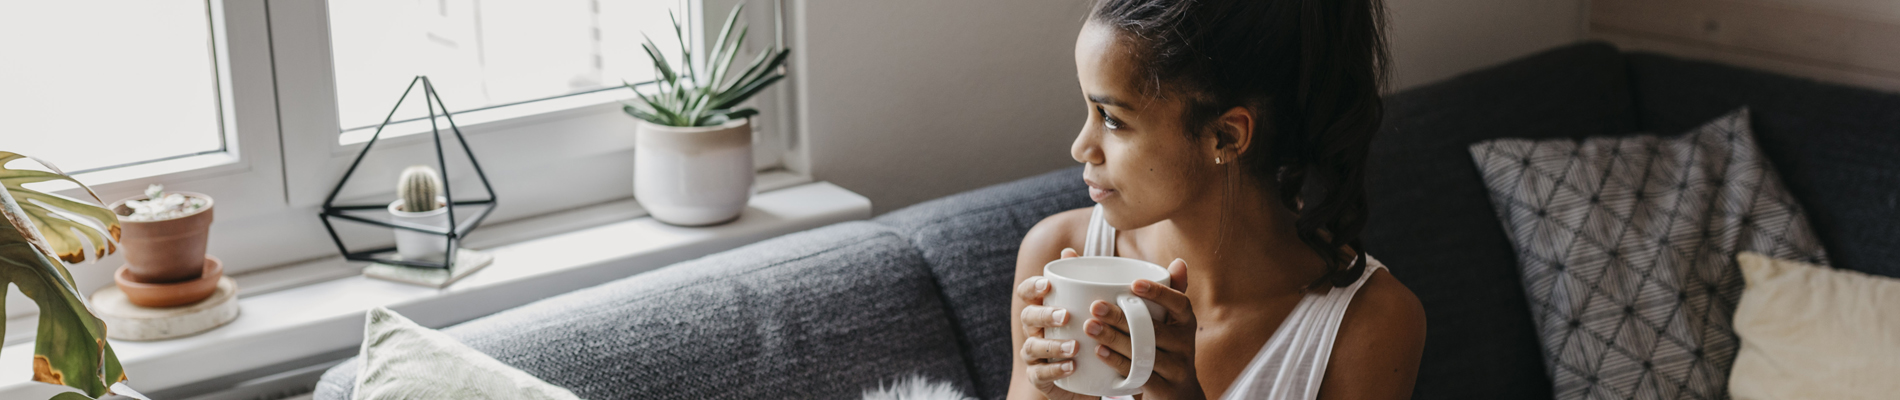 Woman gazing out window on couch with a cup of coffee